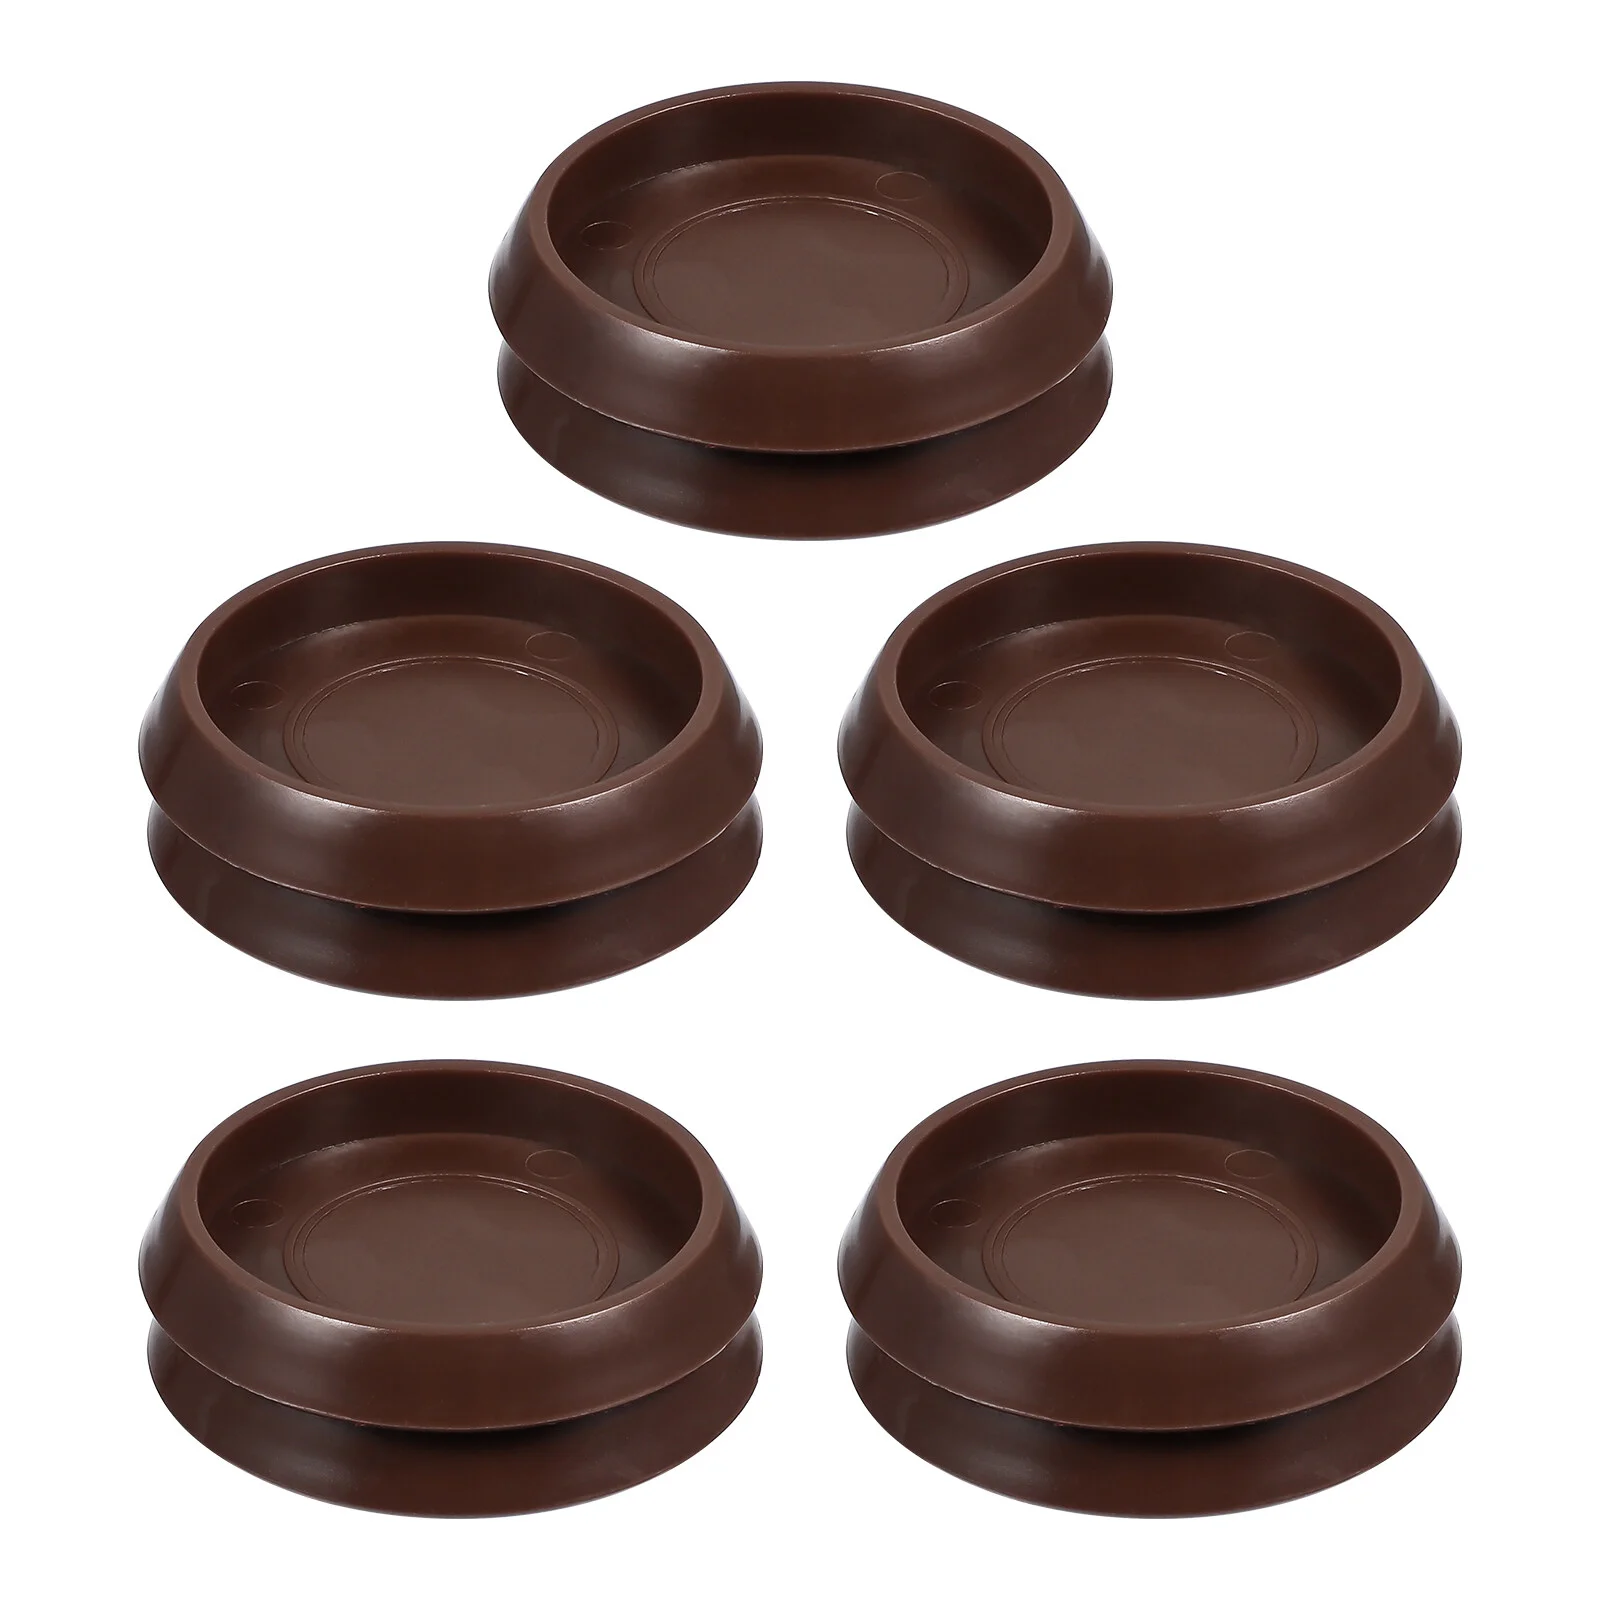 

10 Pcs Caster Cup Anti Slide Furniture Pads Silicone Coasters Carpet Round Area Rugs Piano Cups Sofa Chairs